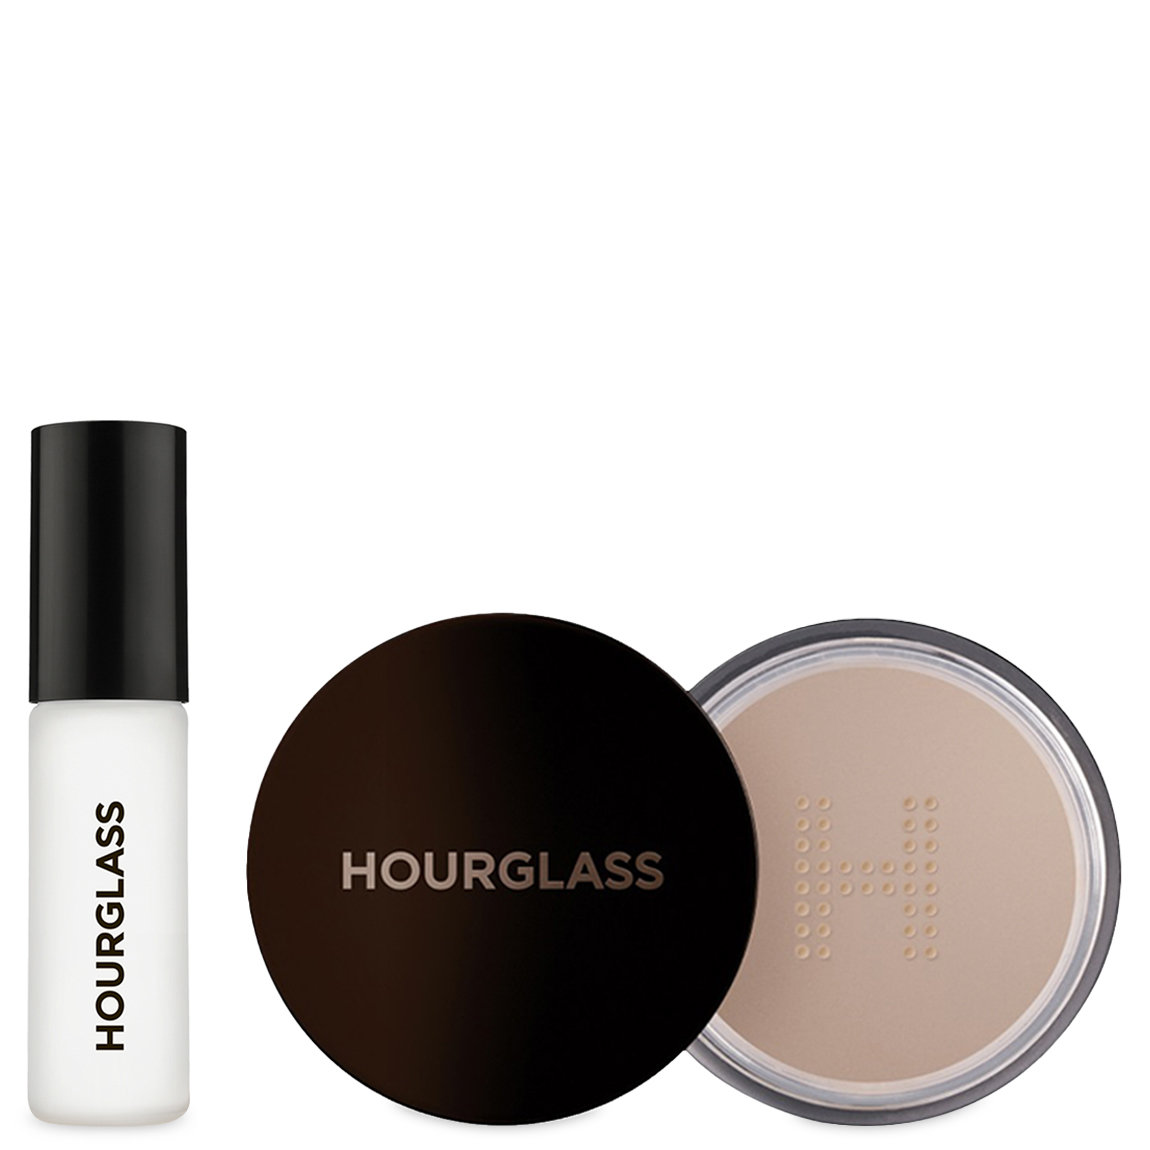 Free gift with qualifying Hourglass purchase